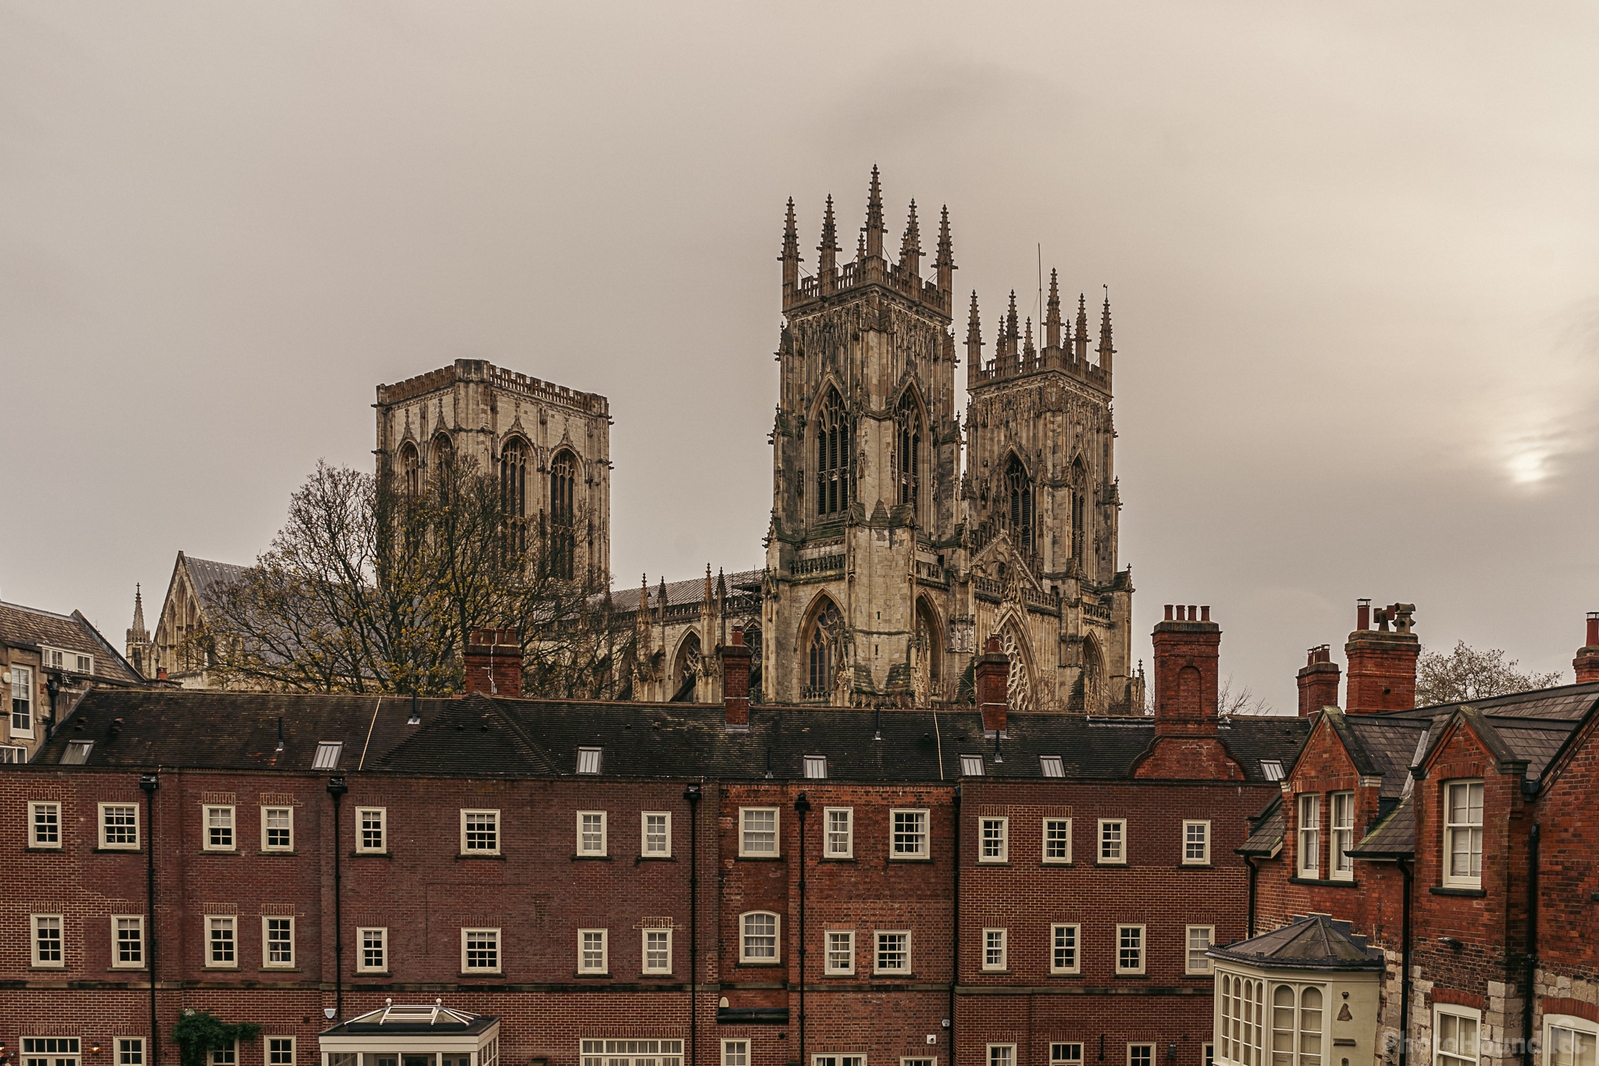 Image of York Minster from the city walls by James Billings.